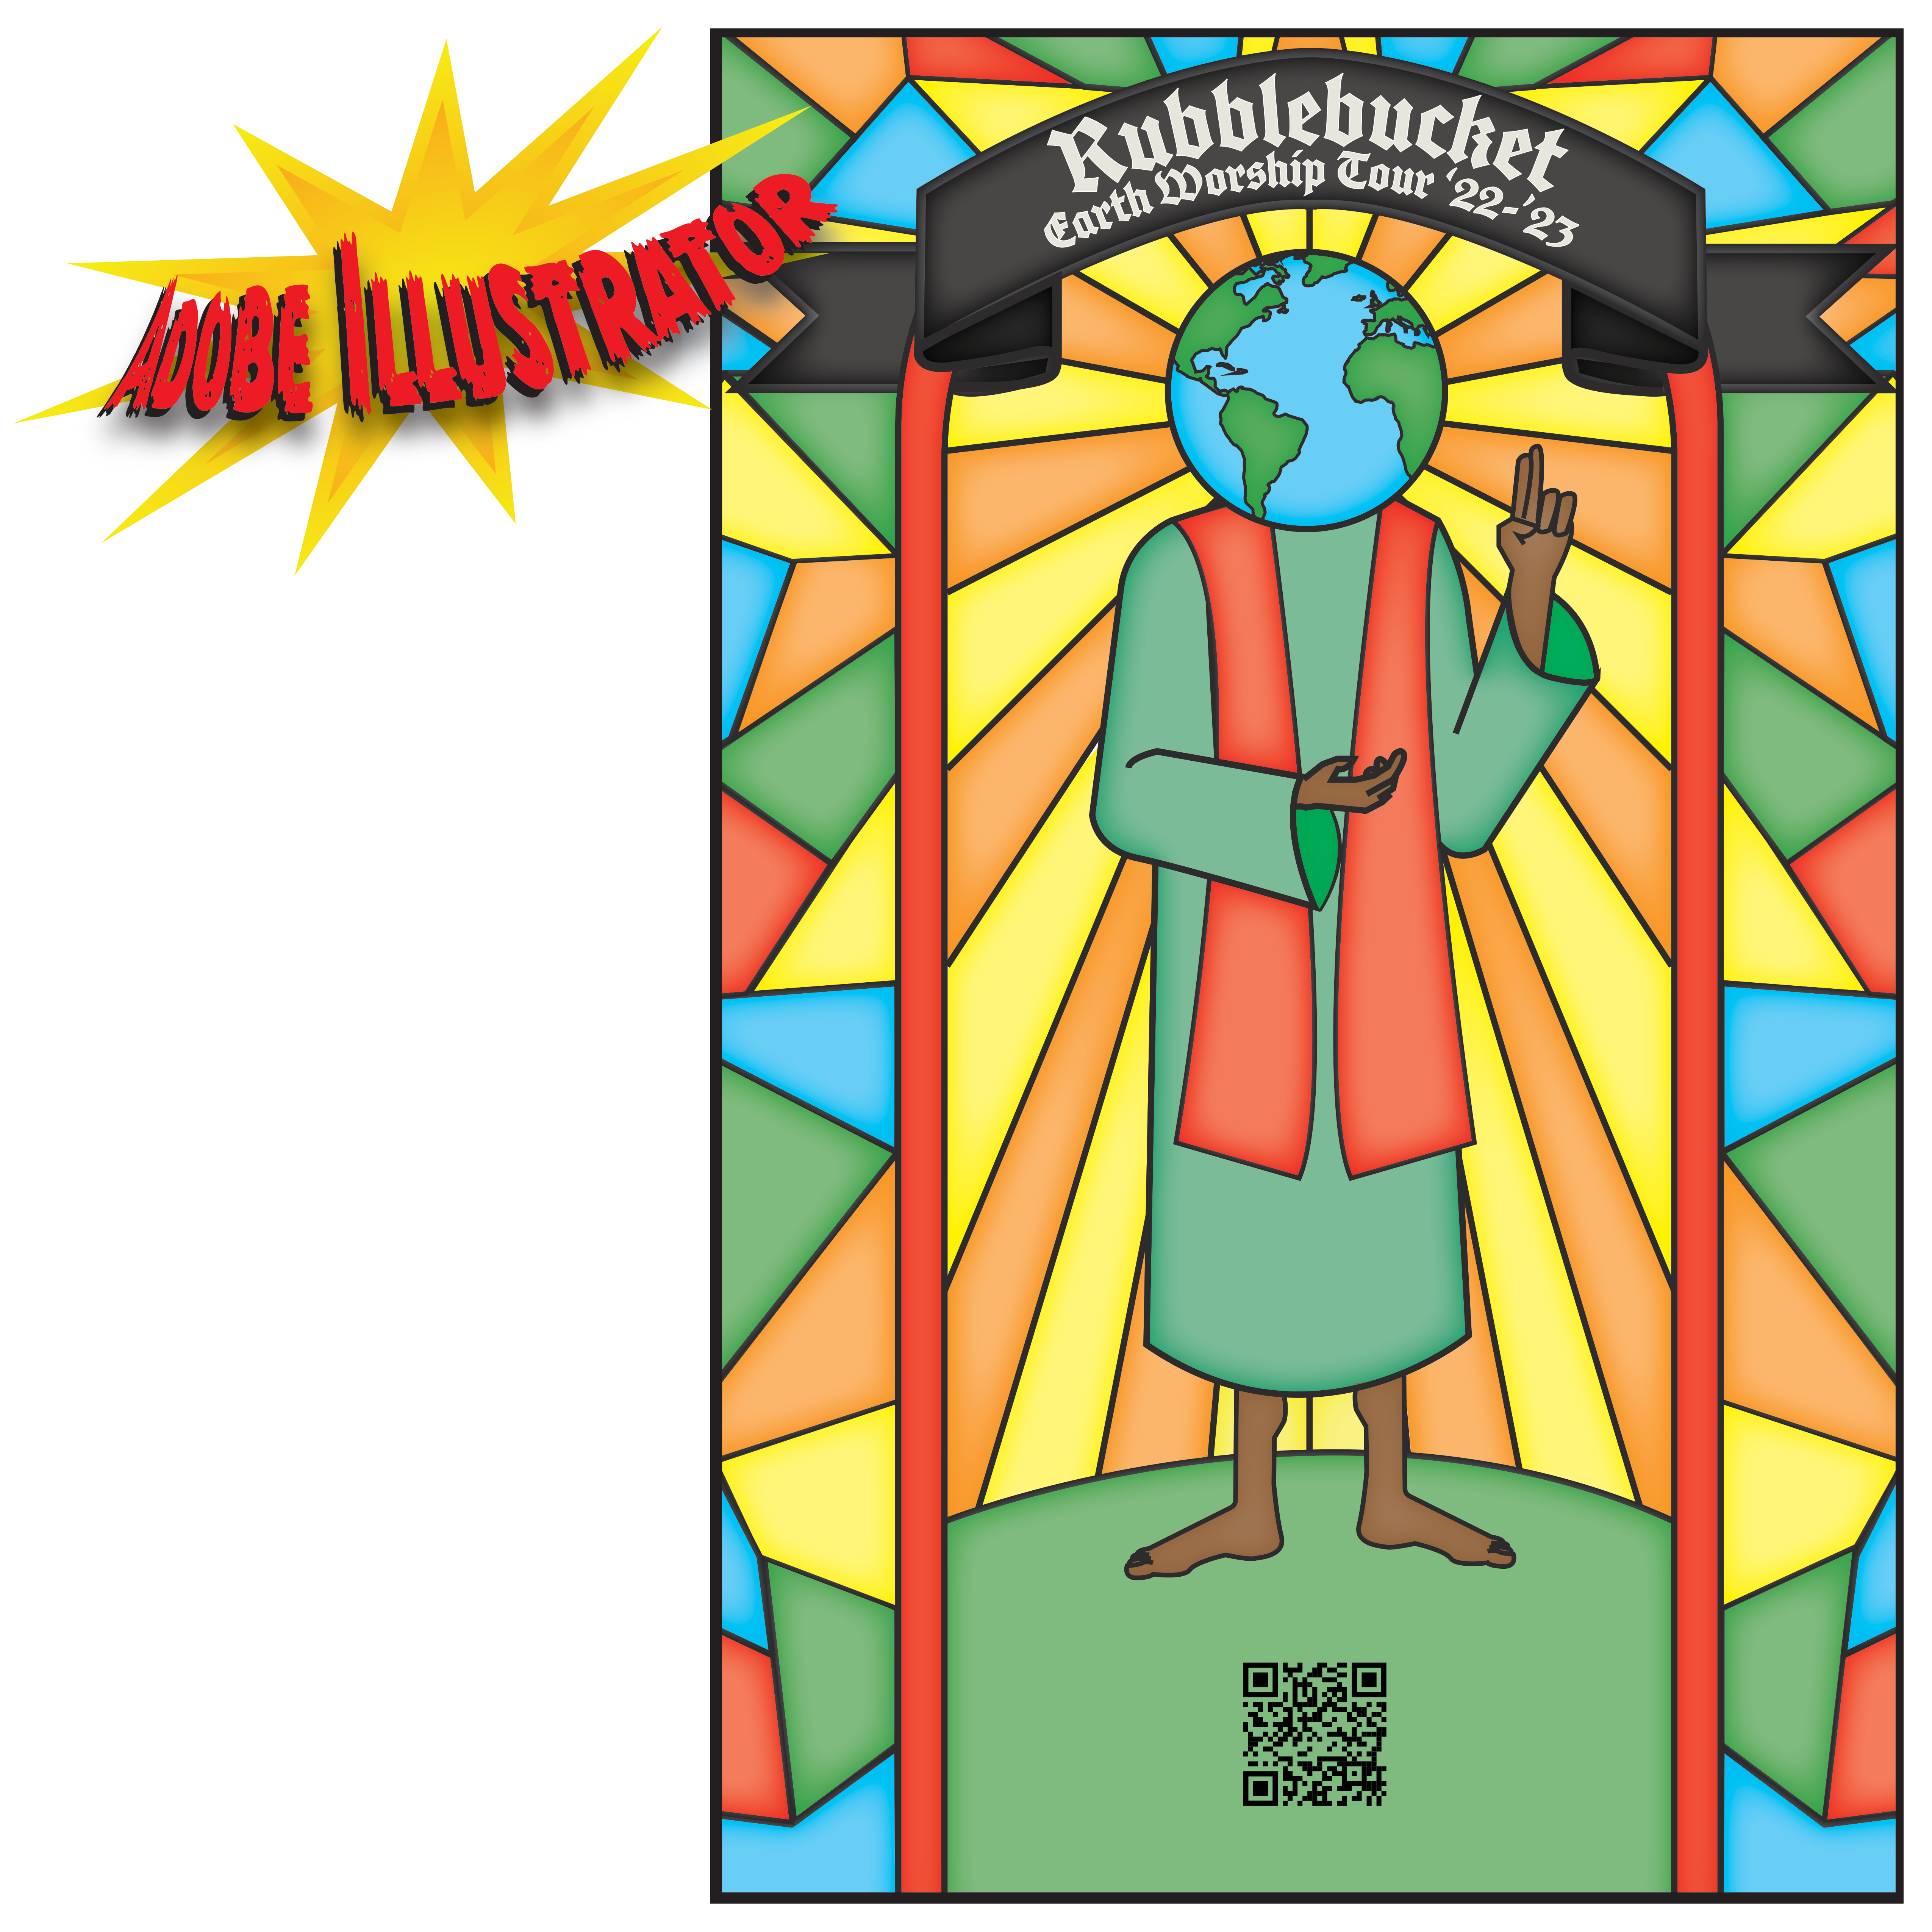 Event Poster for Rubblebucket's 2022-2023 Earth Worship Tour. Created with Adobe Illustrator.